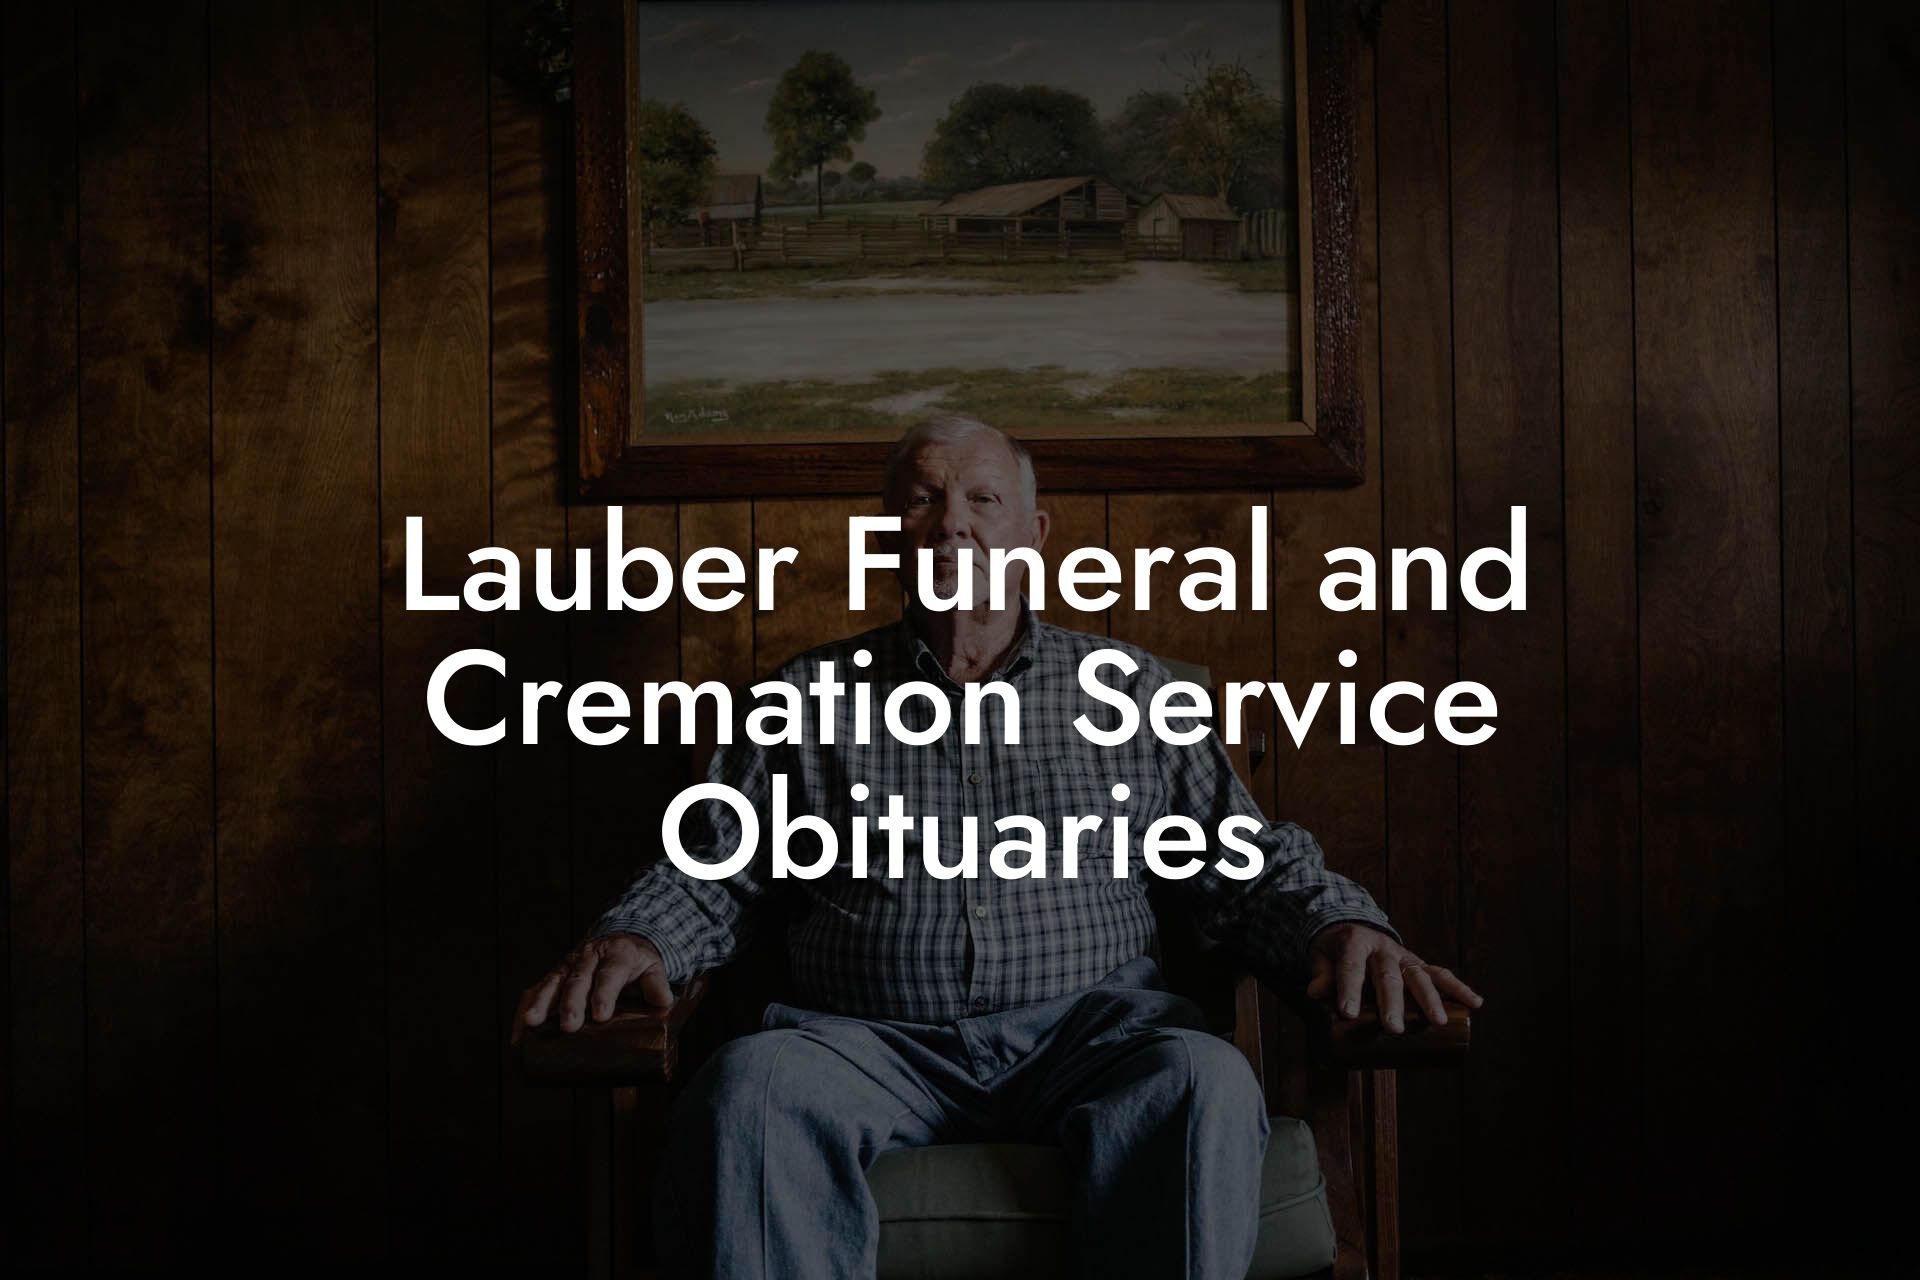 Lauber Funeral and Cremation Service Obituaries